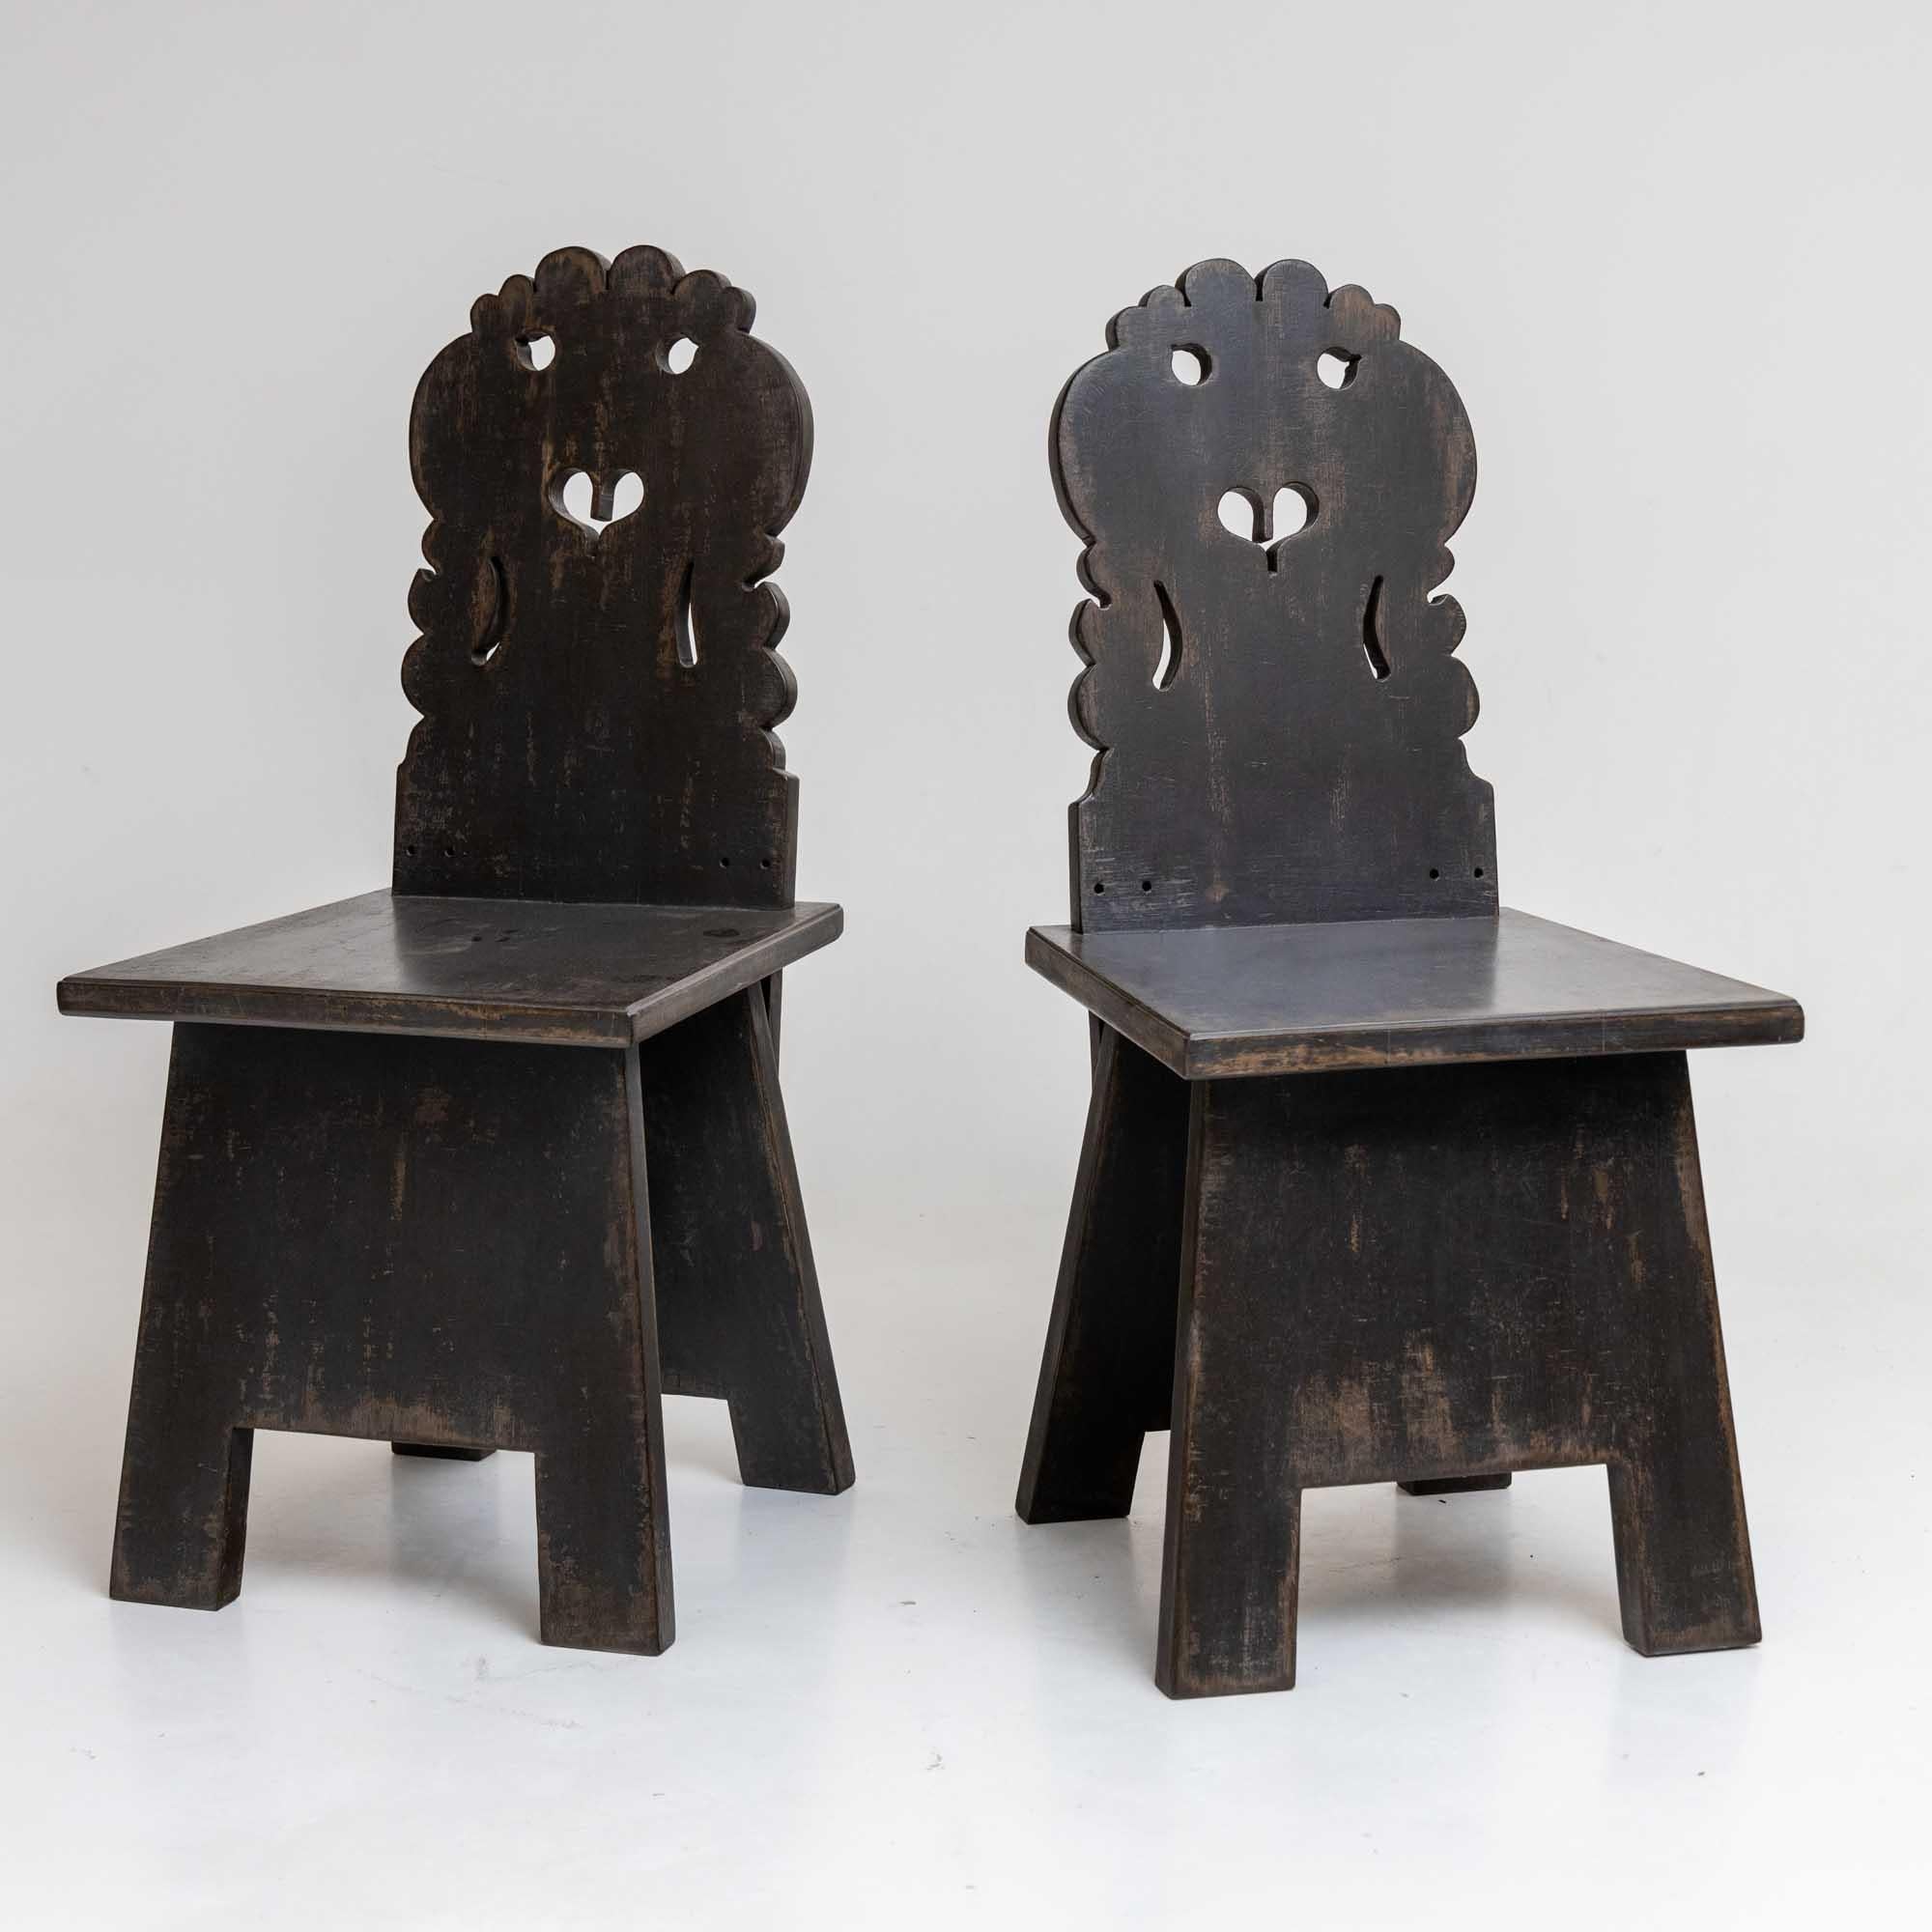 Pair of board chairs with cut-out curved backrests with a heart-shaped opening. The straight seat boards rest on closed legs. The dark gray patination is new and has been given an antique character.